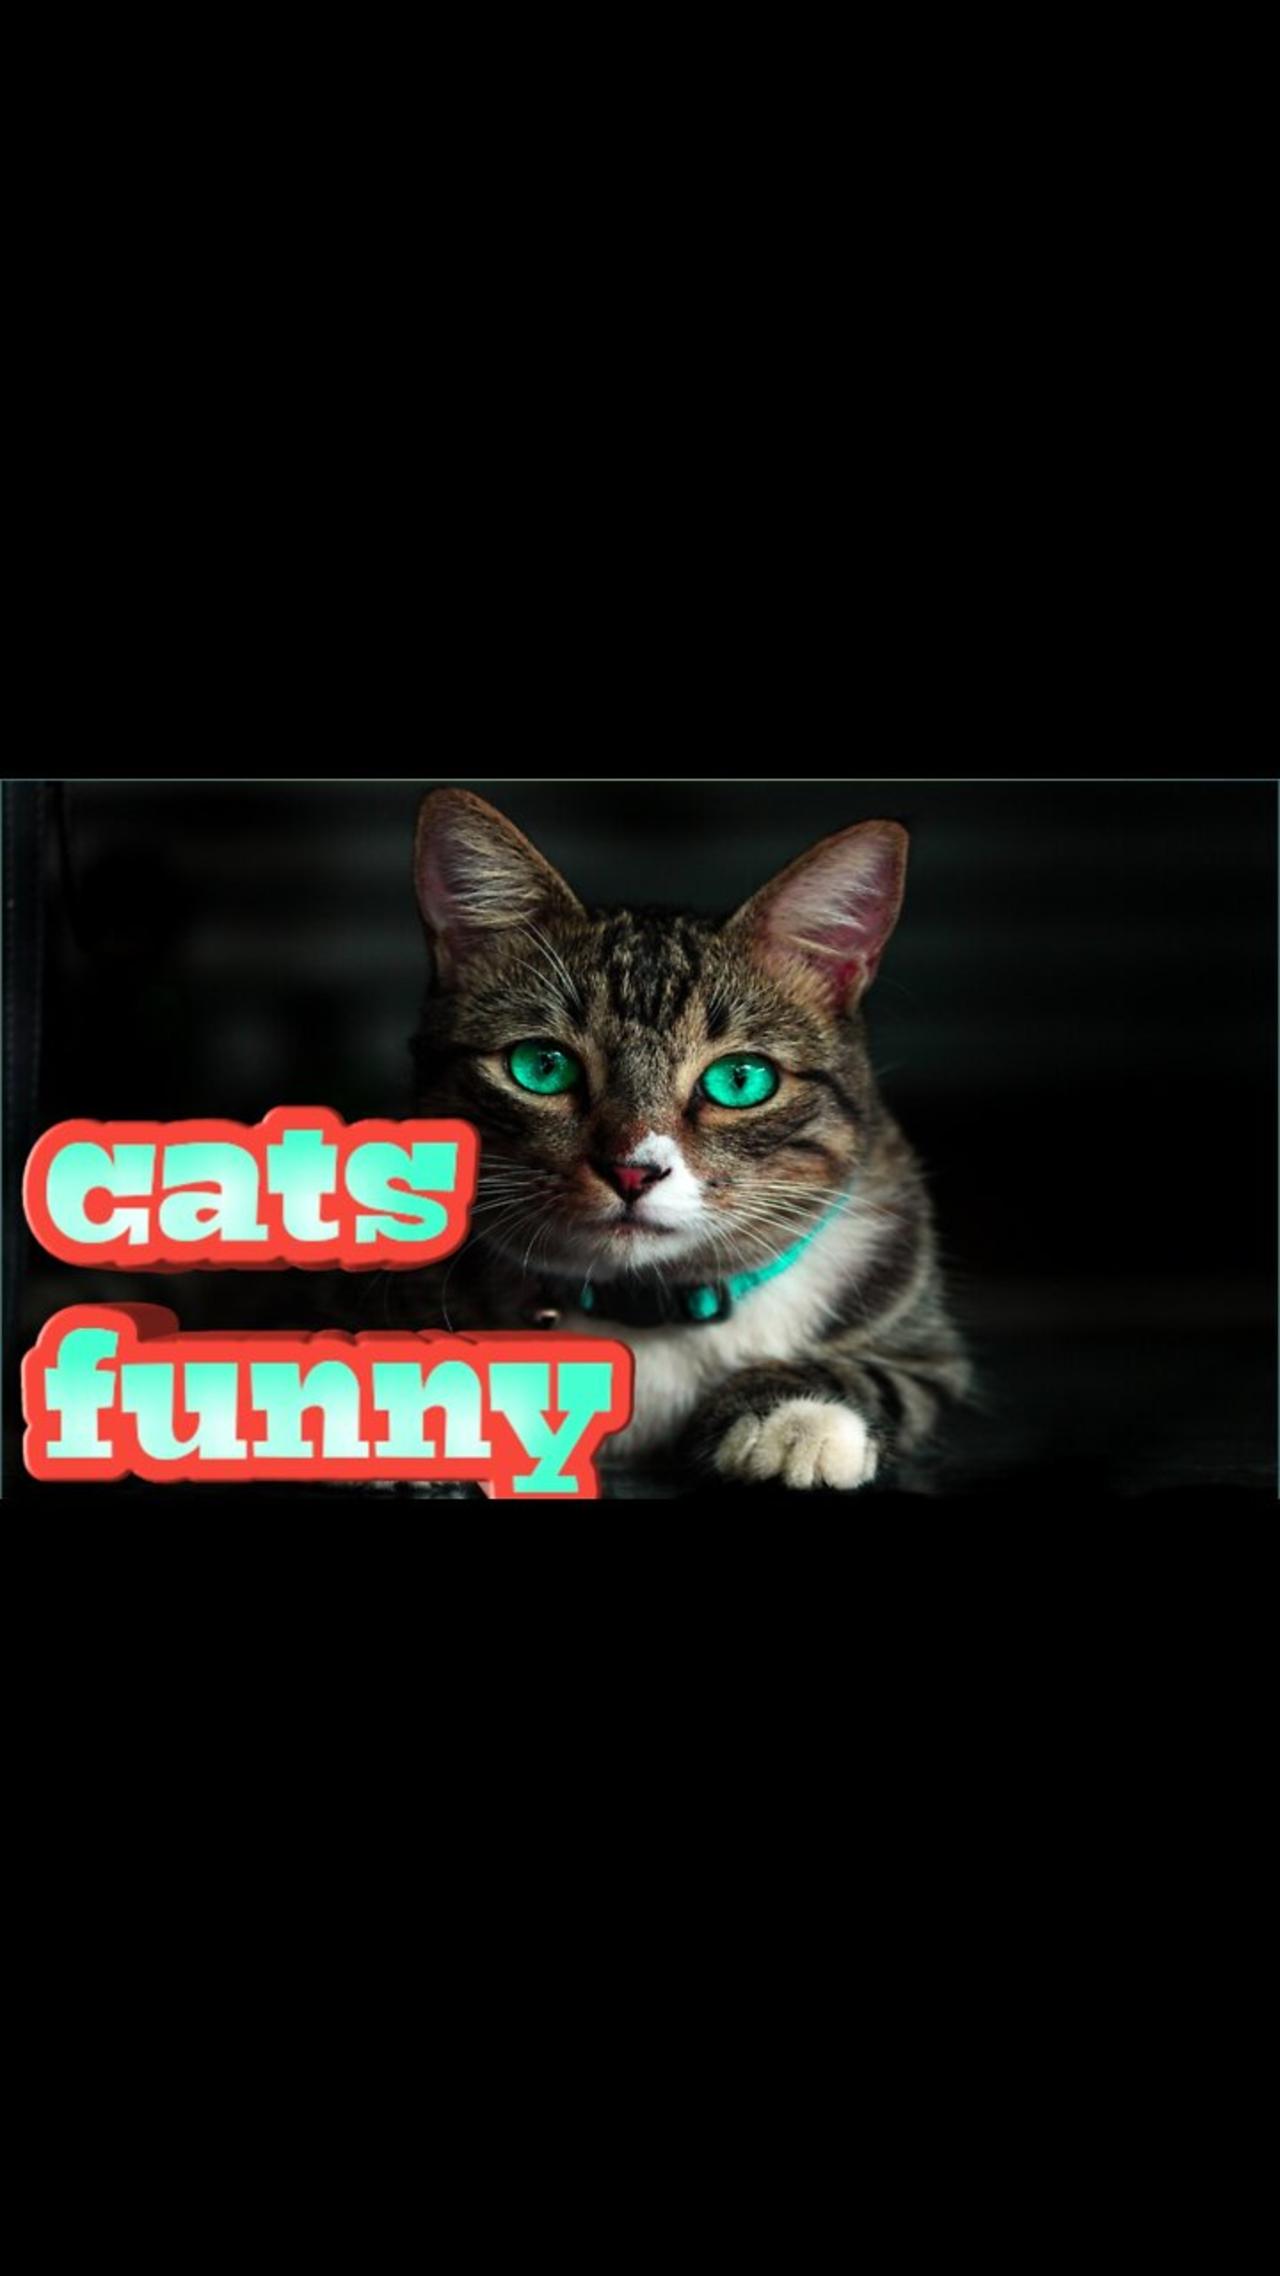 Cute cats funny moments video!